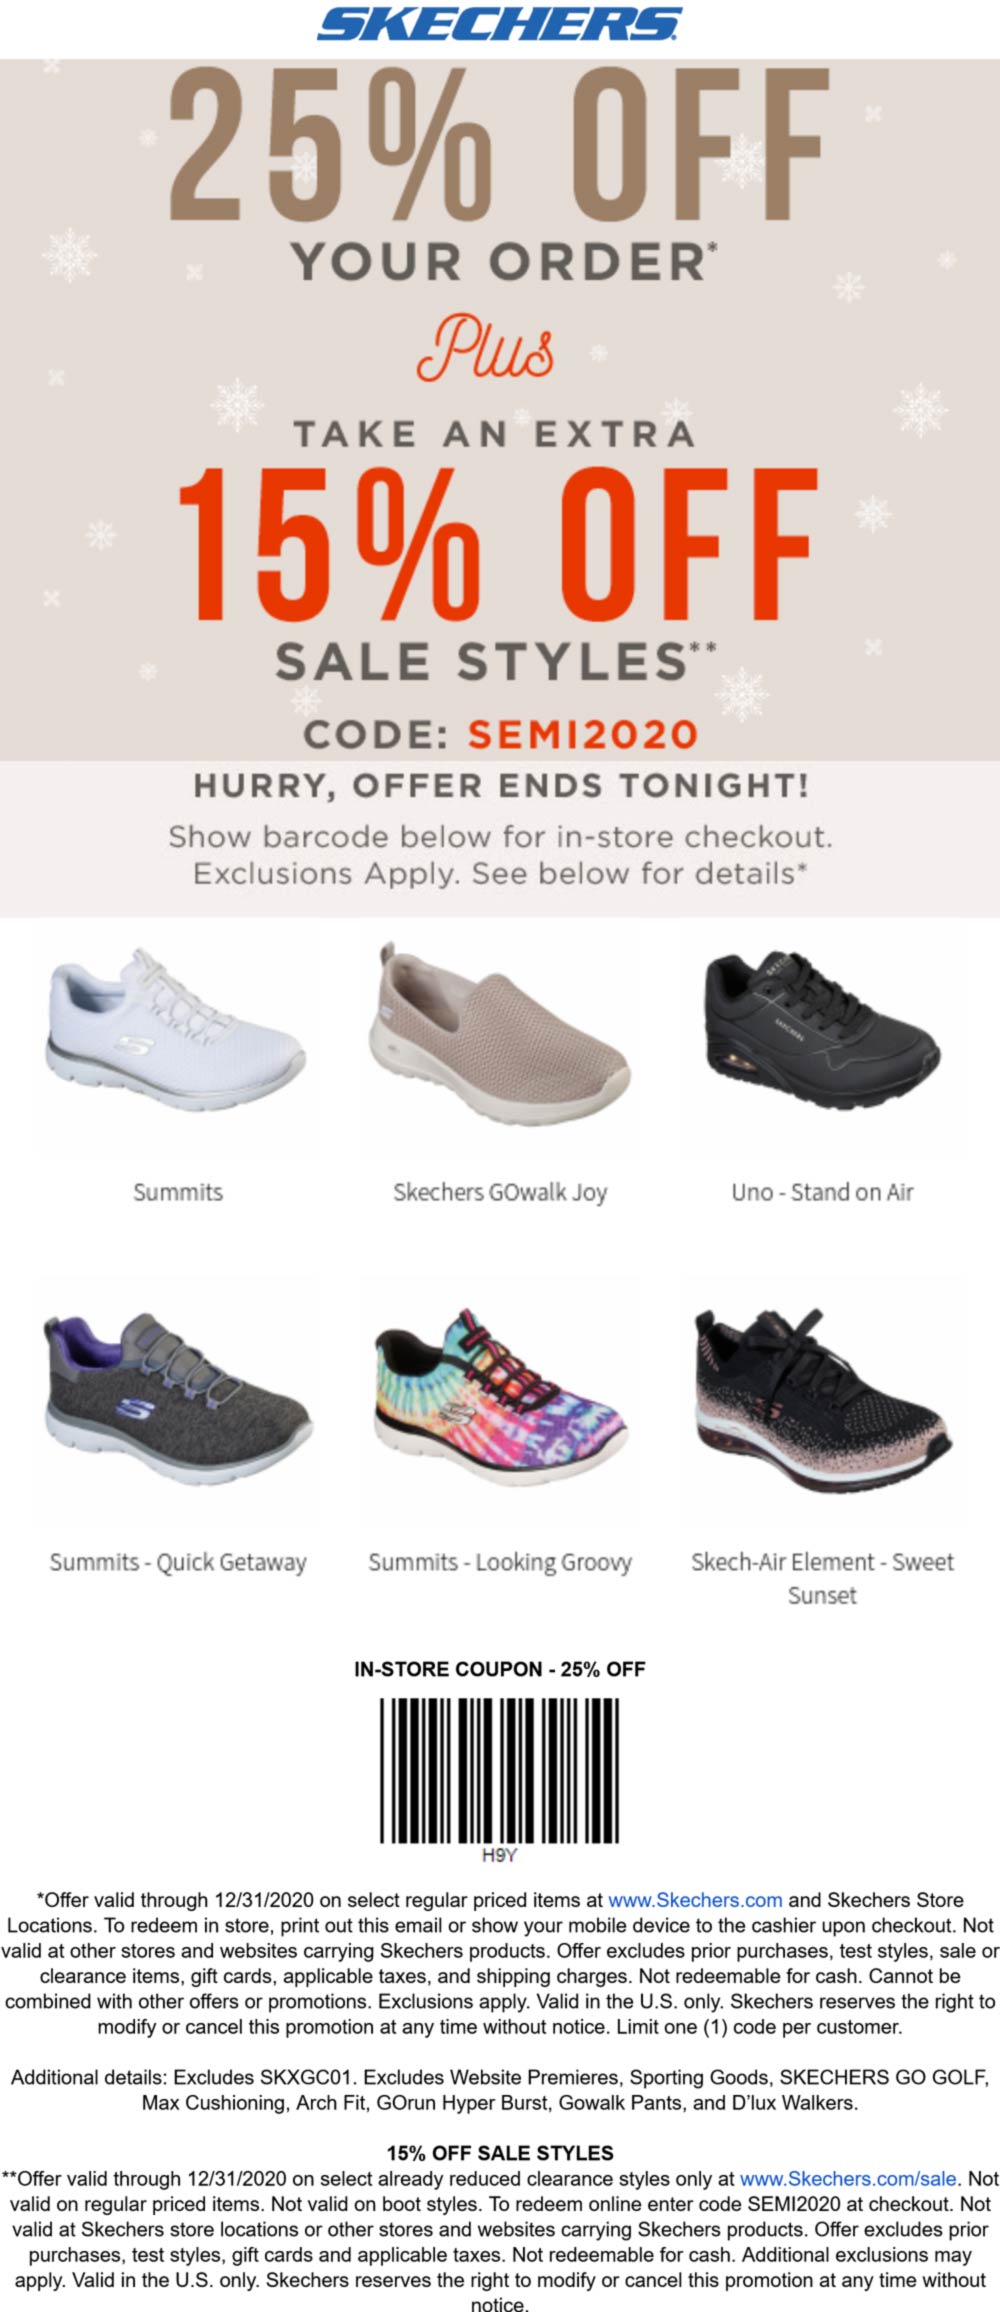 Skechers stores Coupon  25-40% off shoes today at Skechers via promo code SEMI2020 #skechers 